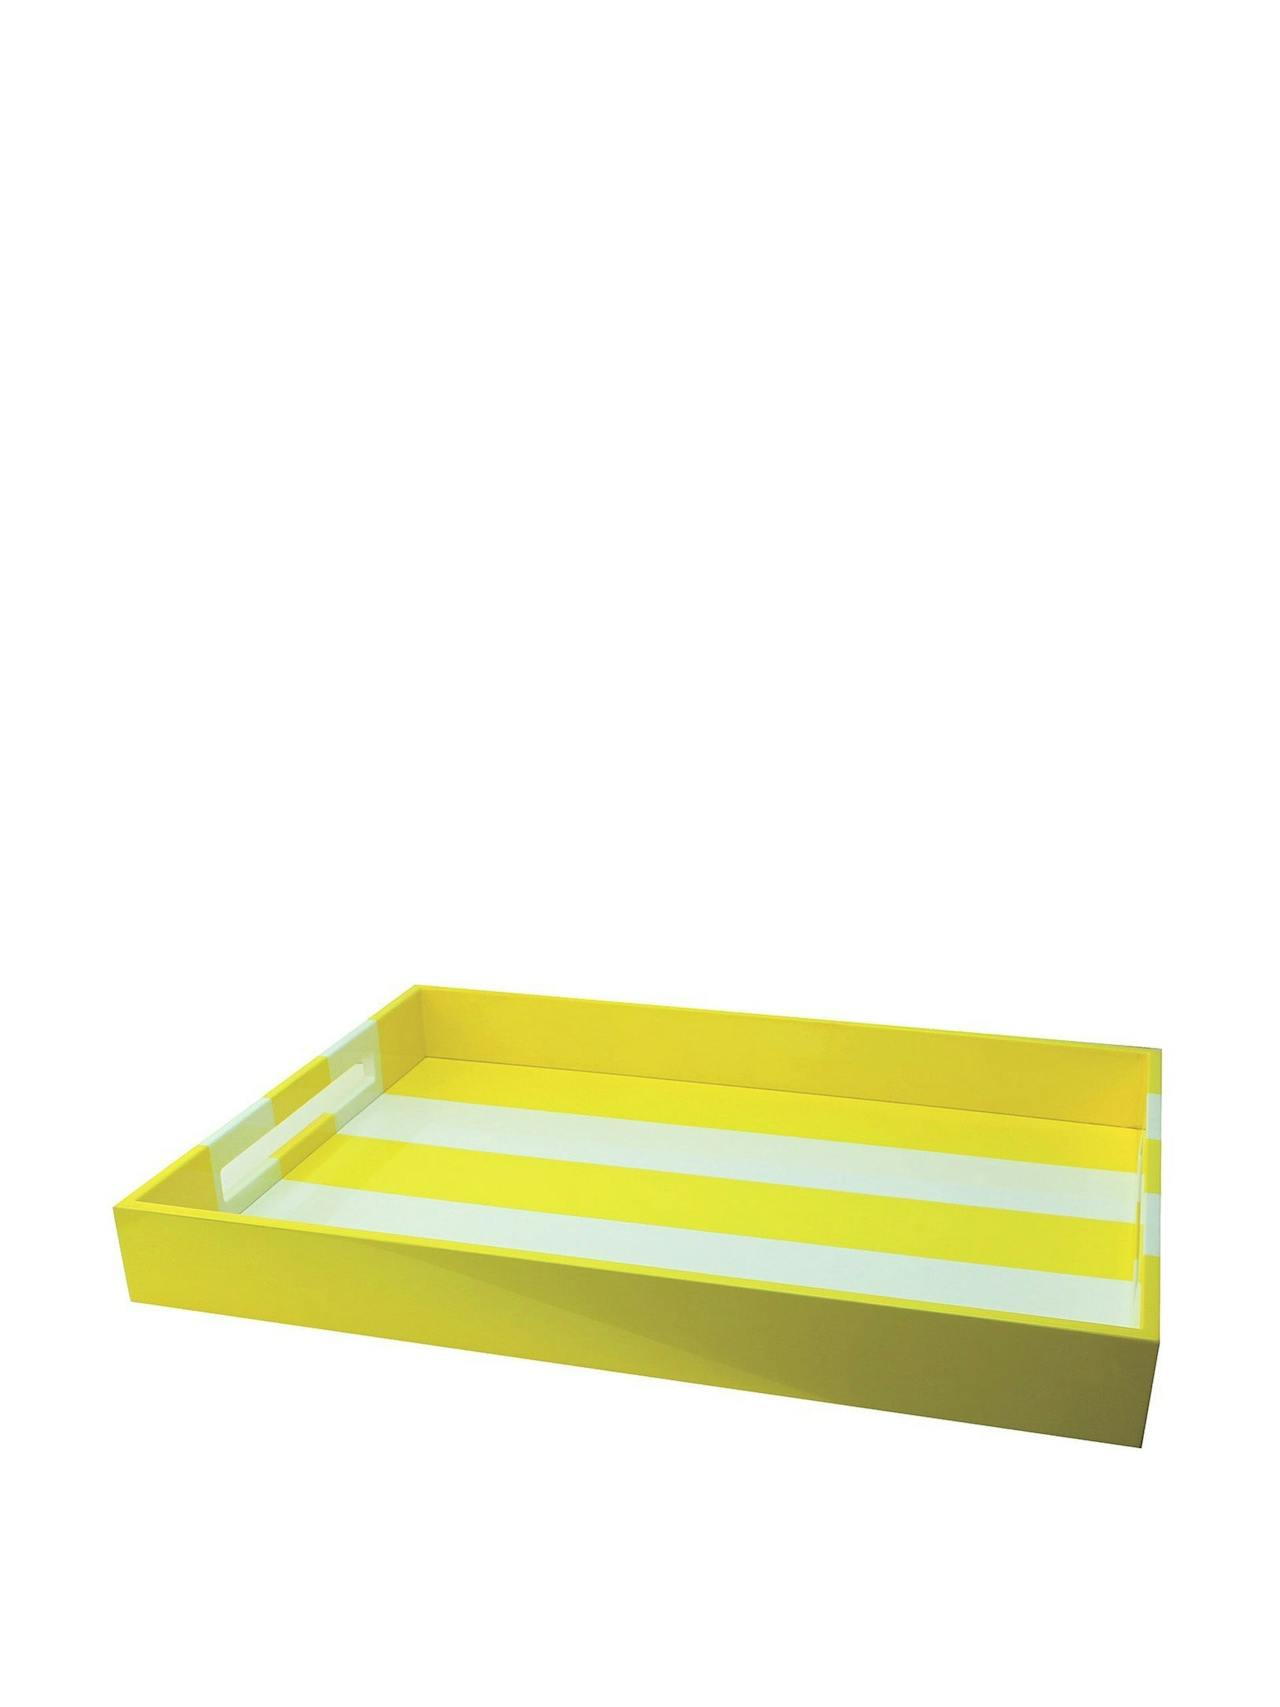 Yellow and white striped large tray